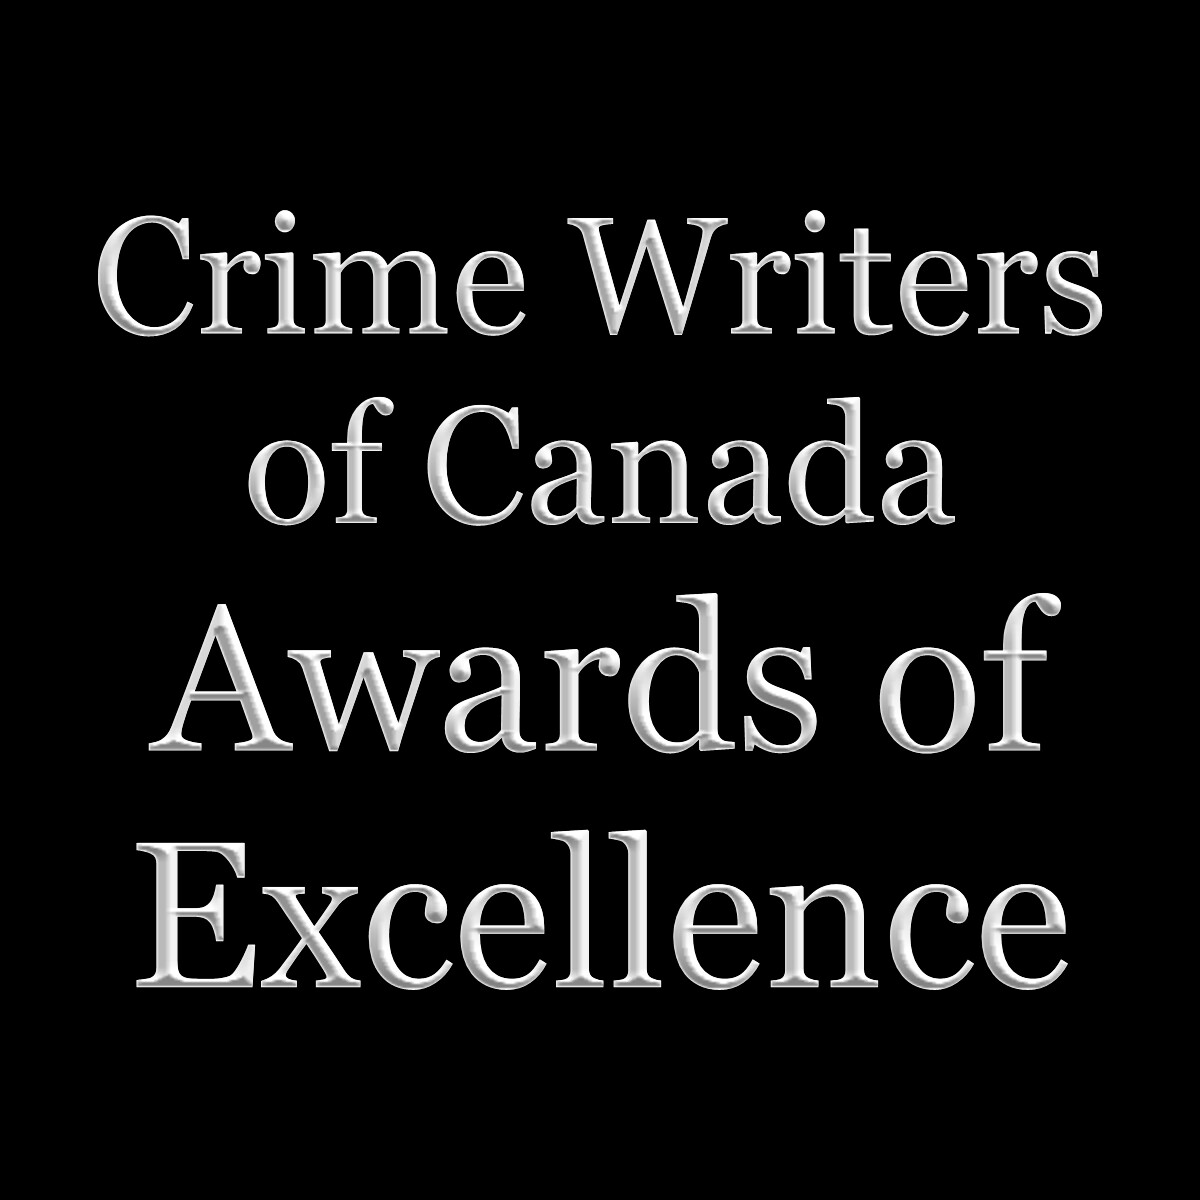 CWC Awards of Excellence Gala Tickets